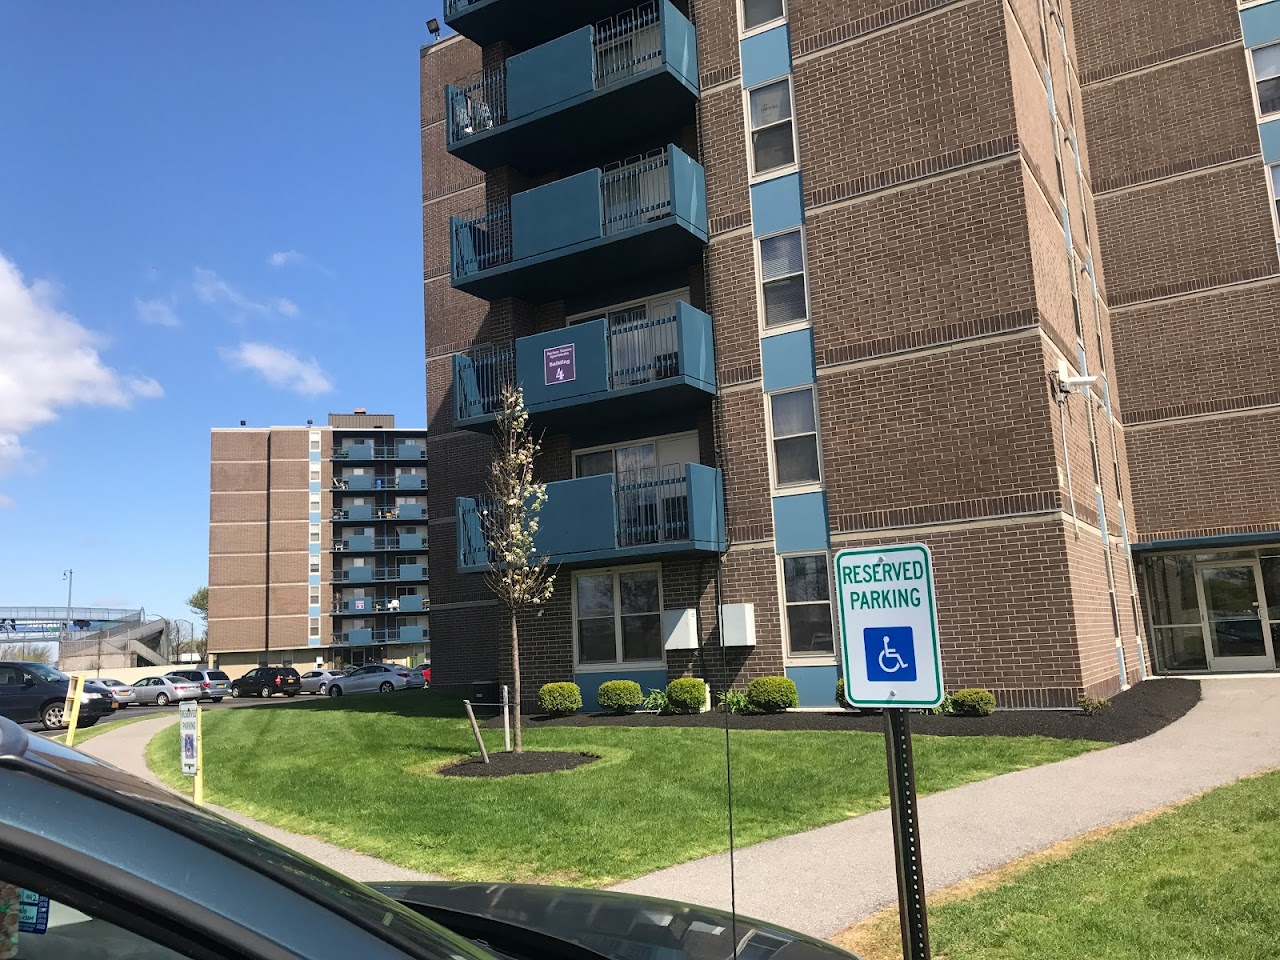 Photo of MARINER TOWERS. Affordable housing located at 186 EFNER ST BUFFALO, NY 14201